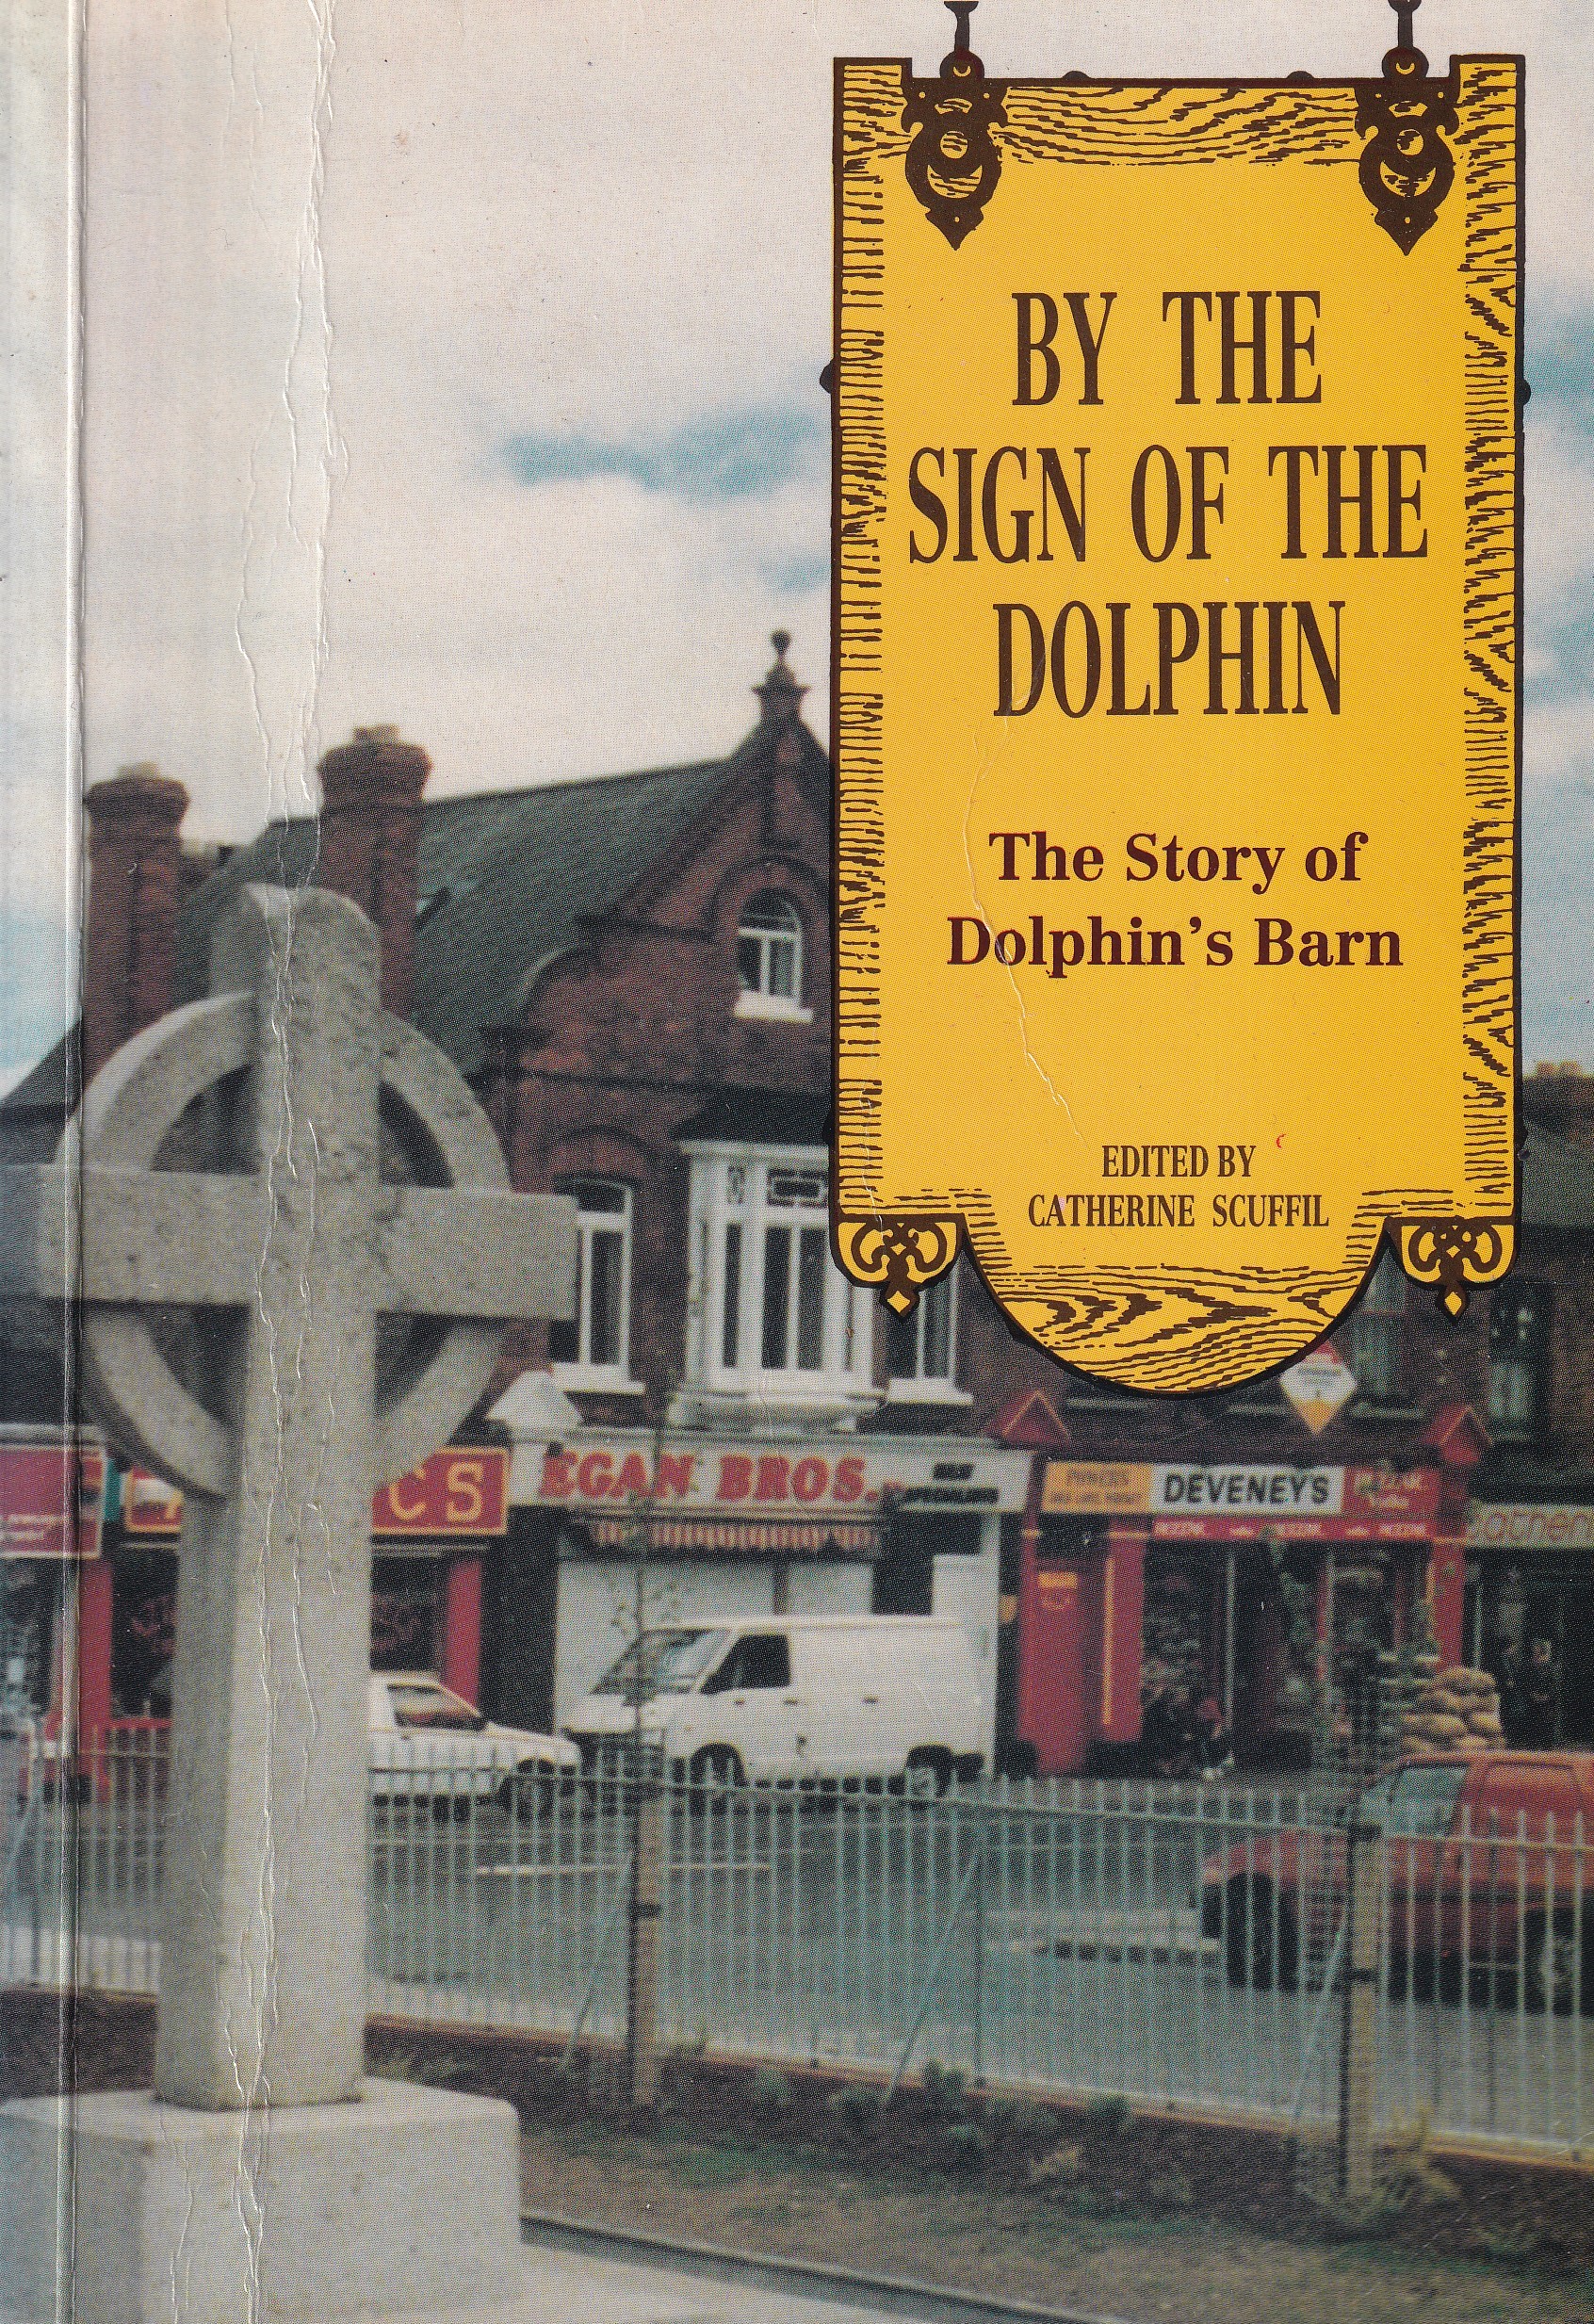 By the Sign of the Dolphin: The Story of Dolphin’s Barn | Catherine Scuffil (ed.) | Charlie Byrne's